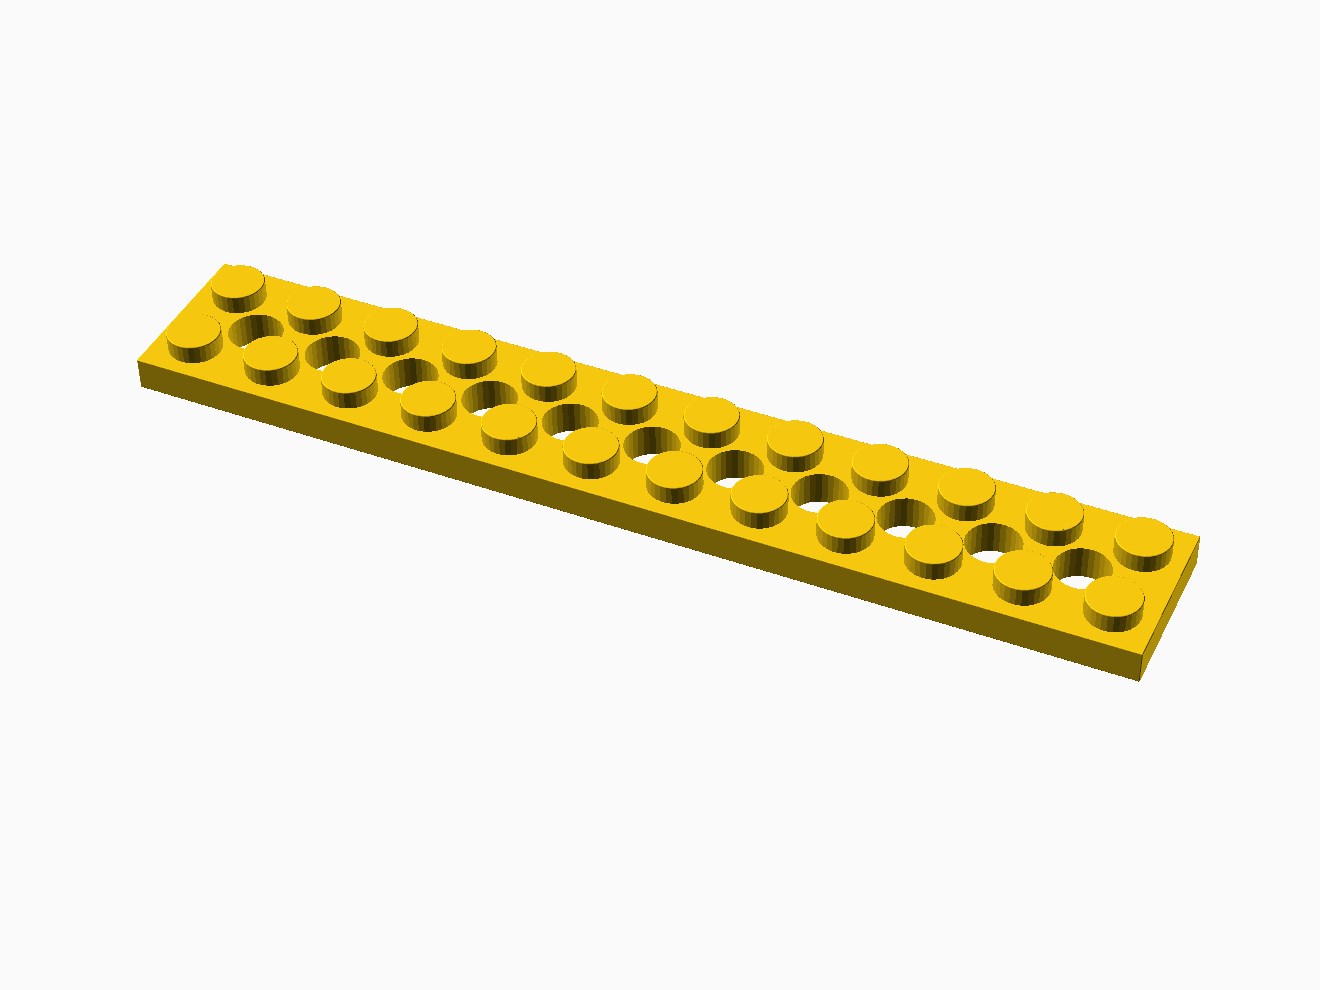 3D printable model of a LEGO Technic 12x2 Plate.